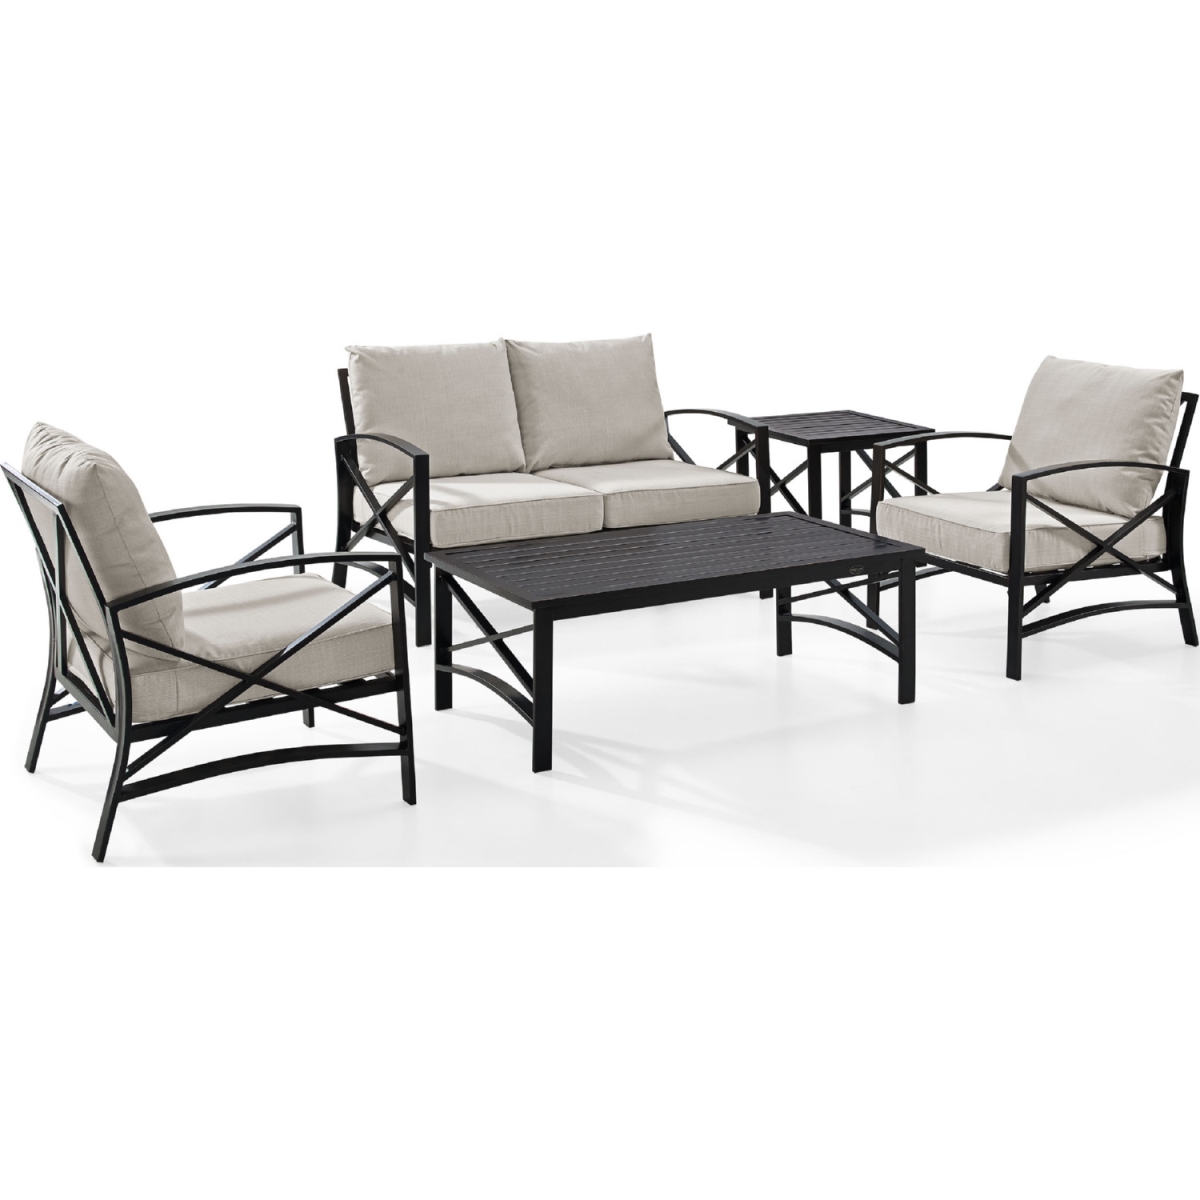 TEMPLETON 5 Piece Kaplan Outdoor Seating Set with Oatmeal Cushion - Loveseat, Two Chairs, Coffee Table, Side Table